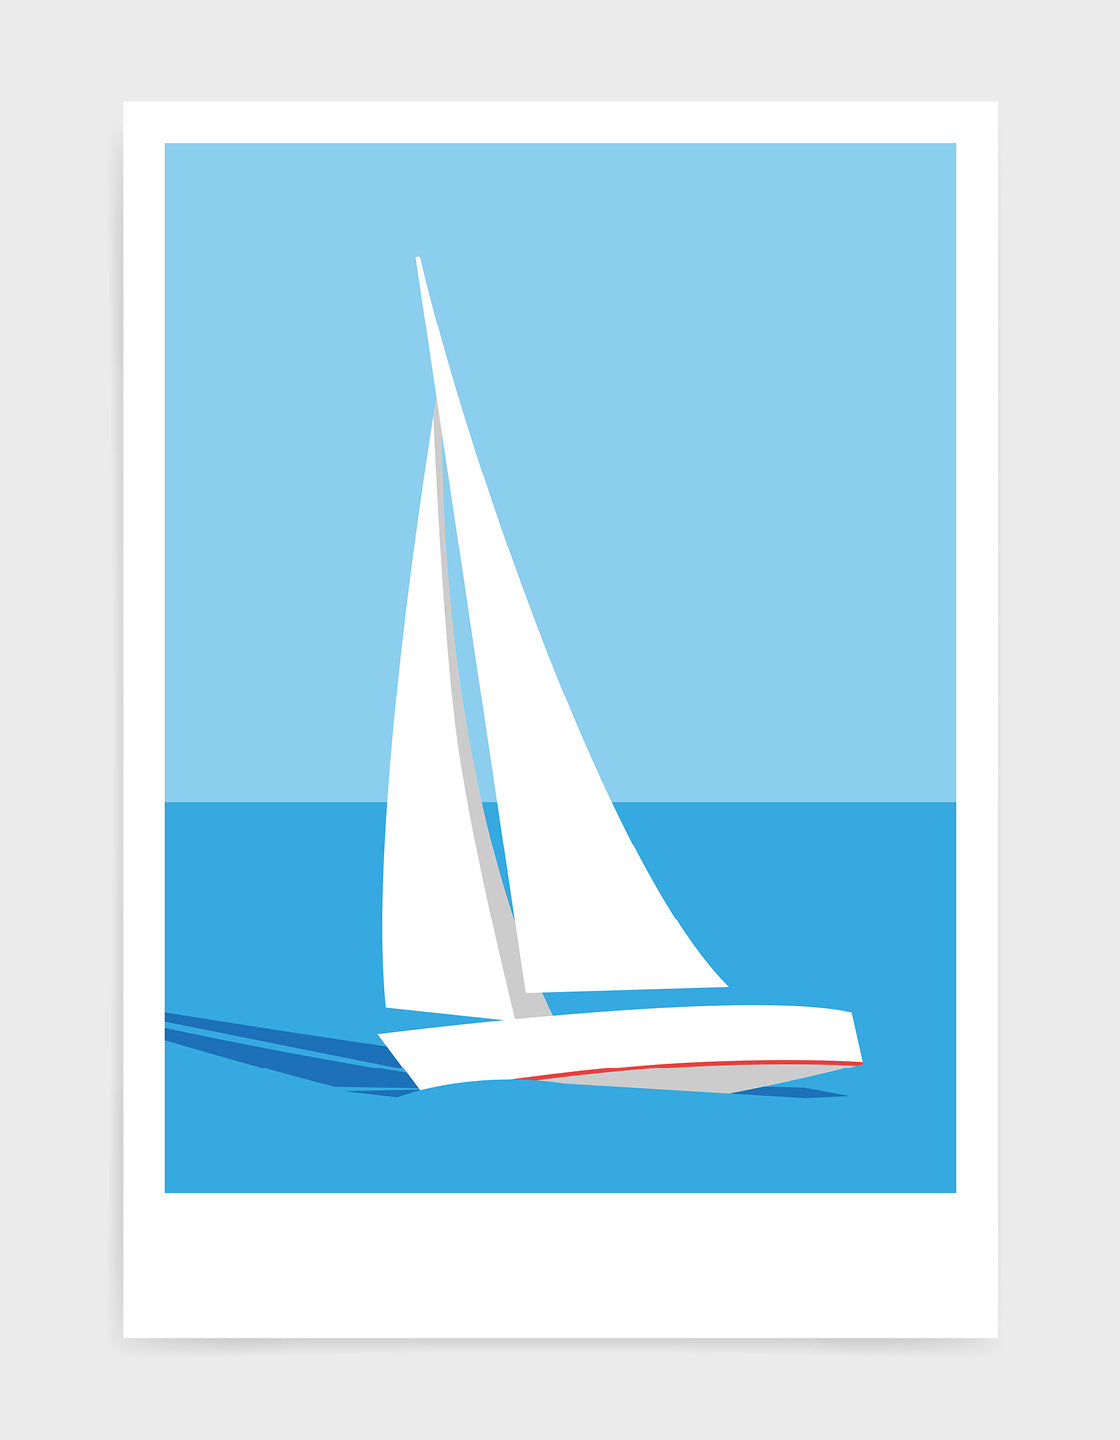 Image of white sailing boat by itself